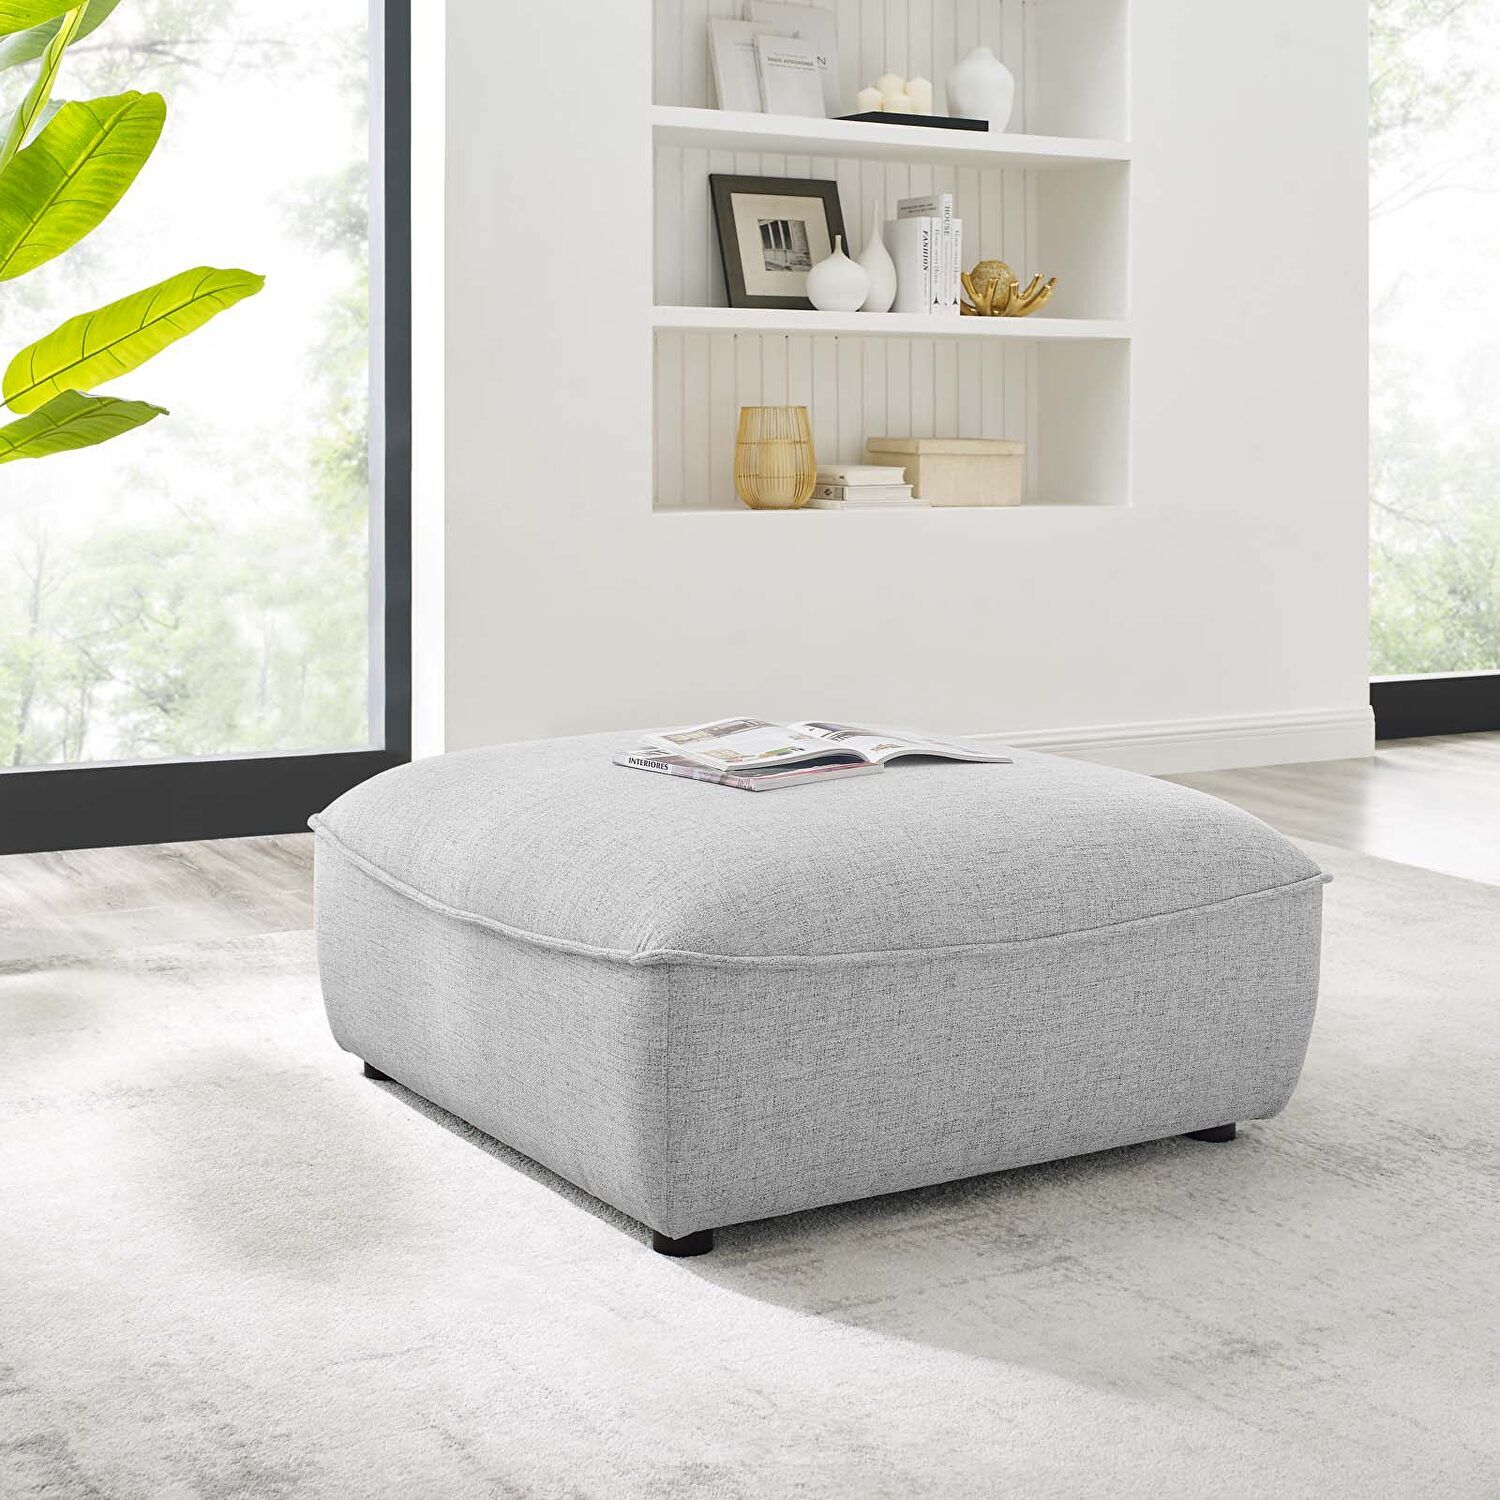 Modway Comprise Light Gray Ottoman Eei 4419 Lgr | Comfyco Within Light Gray Ottomans (View 13 of 15)